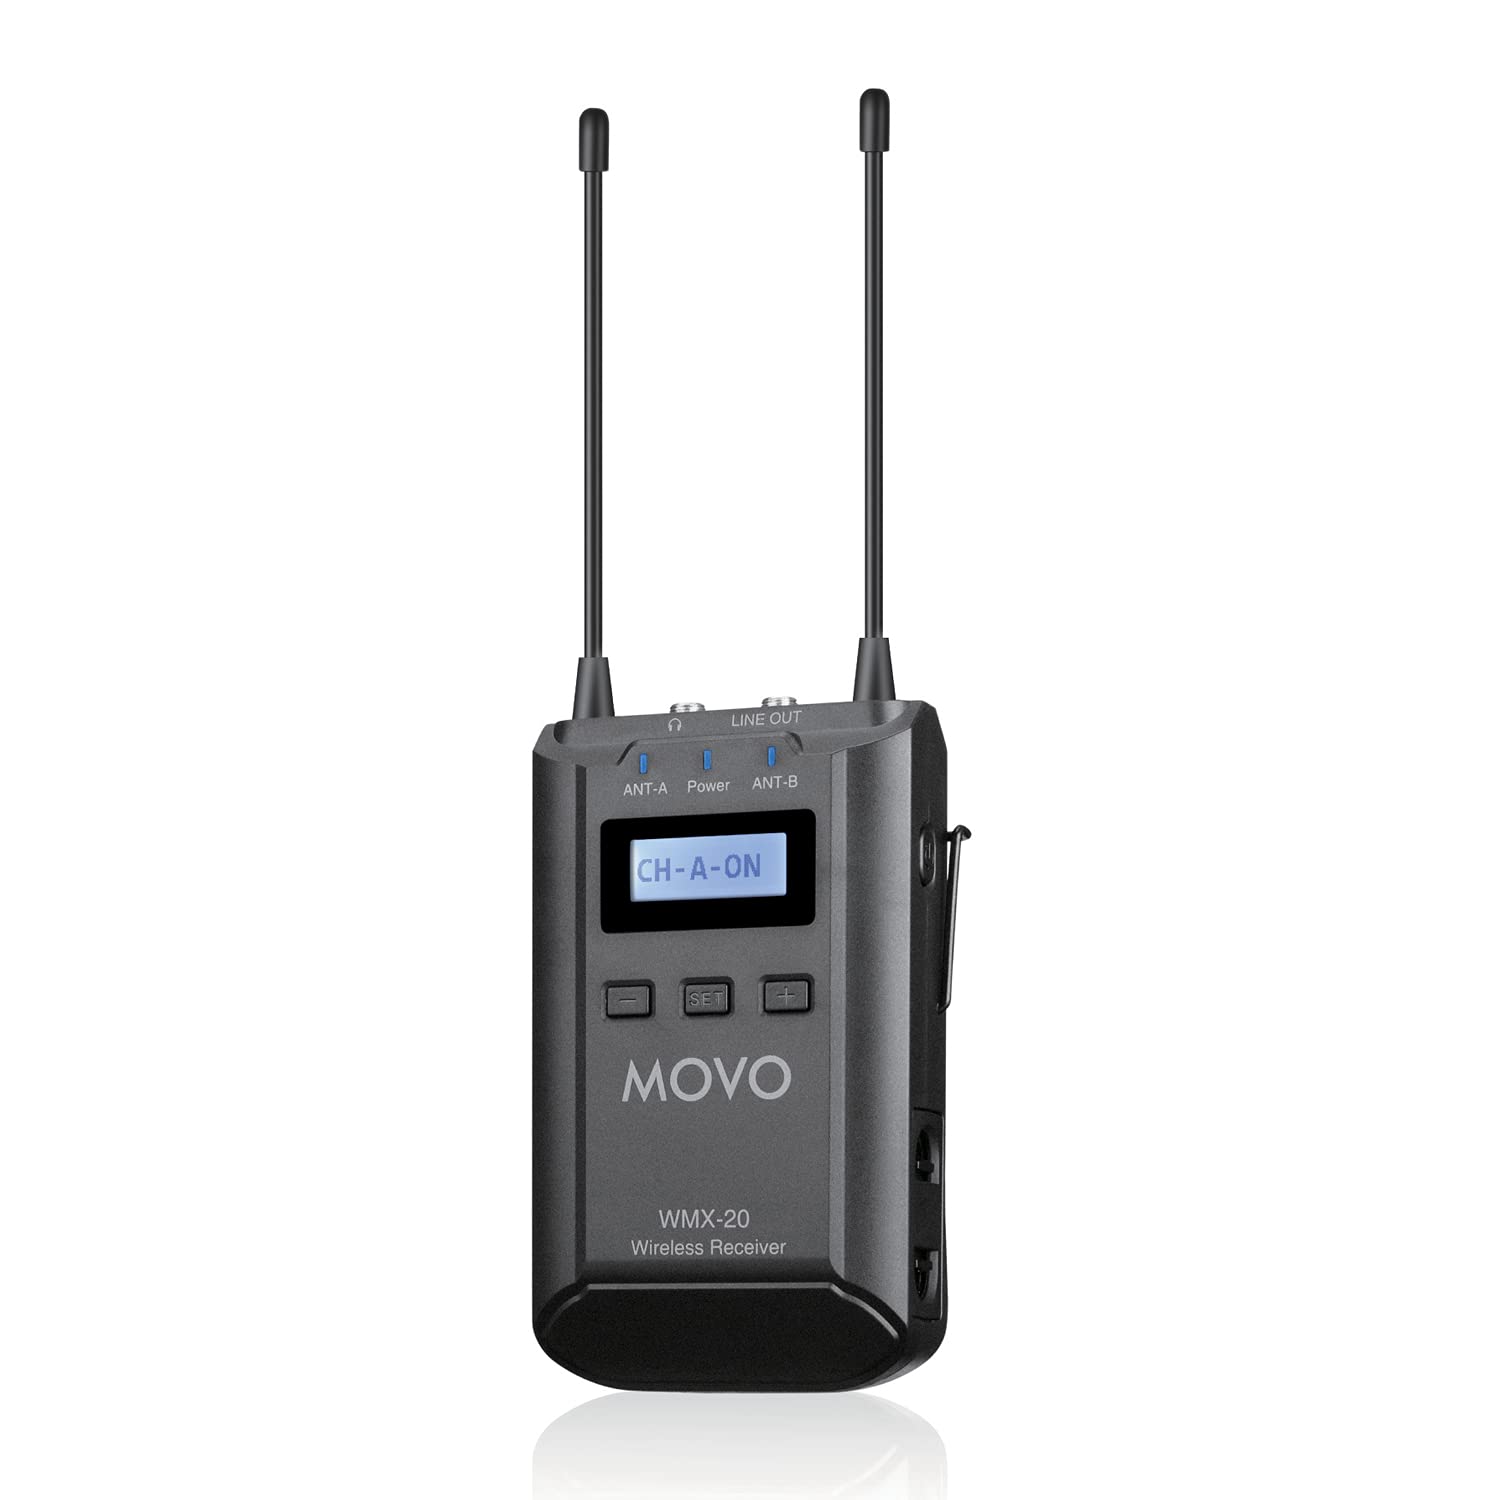 Movo WMX-20-RX Receiver for Wireless Lavalier Microphone System - For WMX-20 UHF Wireless Microphone System - Pairs w/ 2x Lapel Microphone Wireless Transmitters - Headphone Monitoring for Wireless Mic  - Very Good